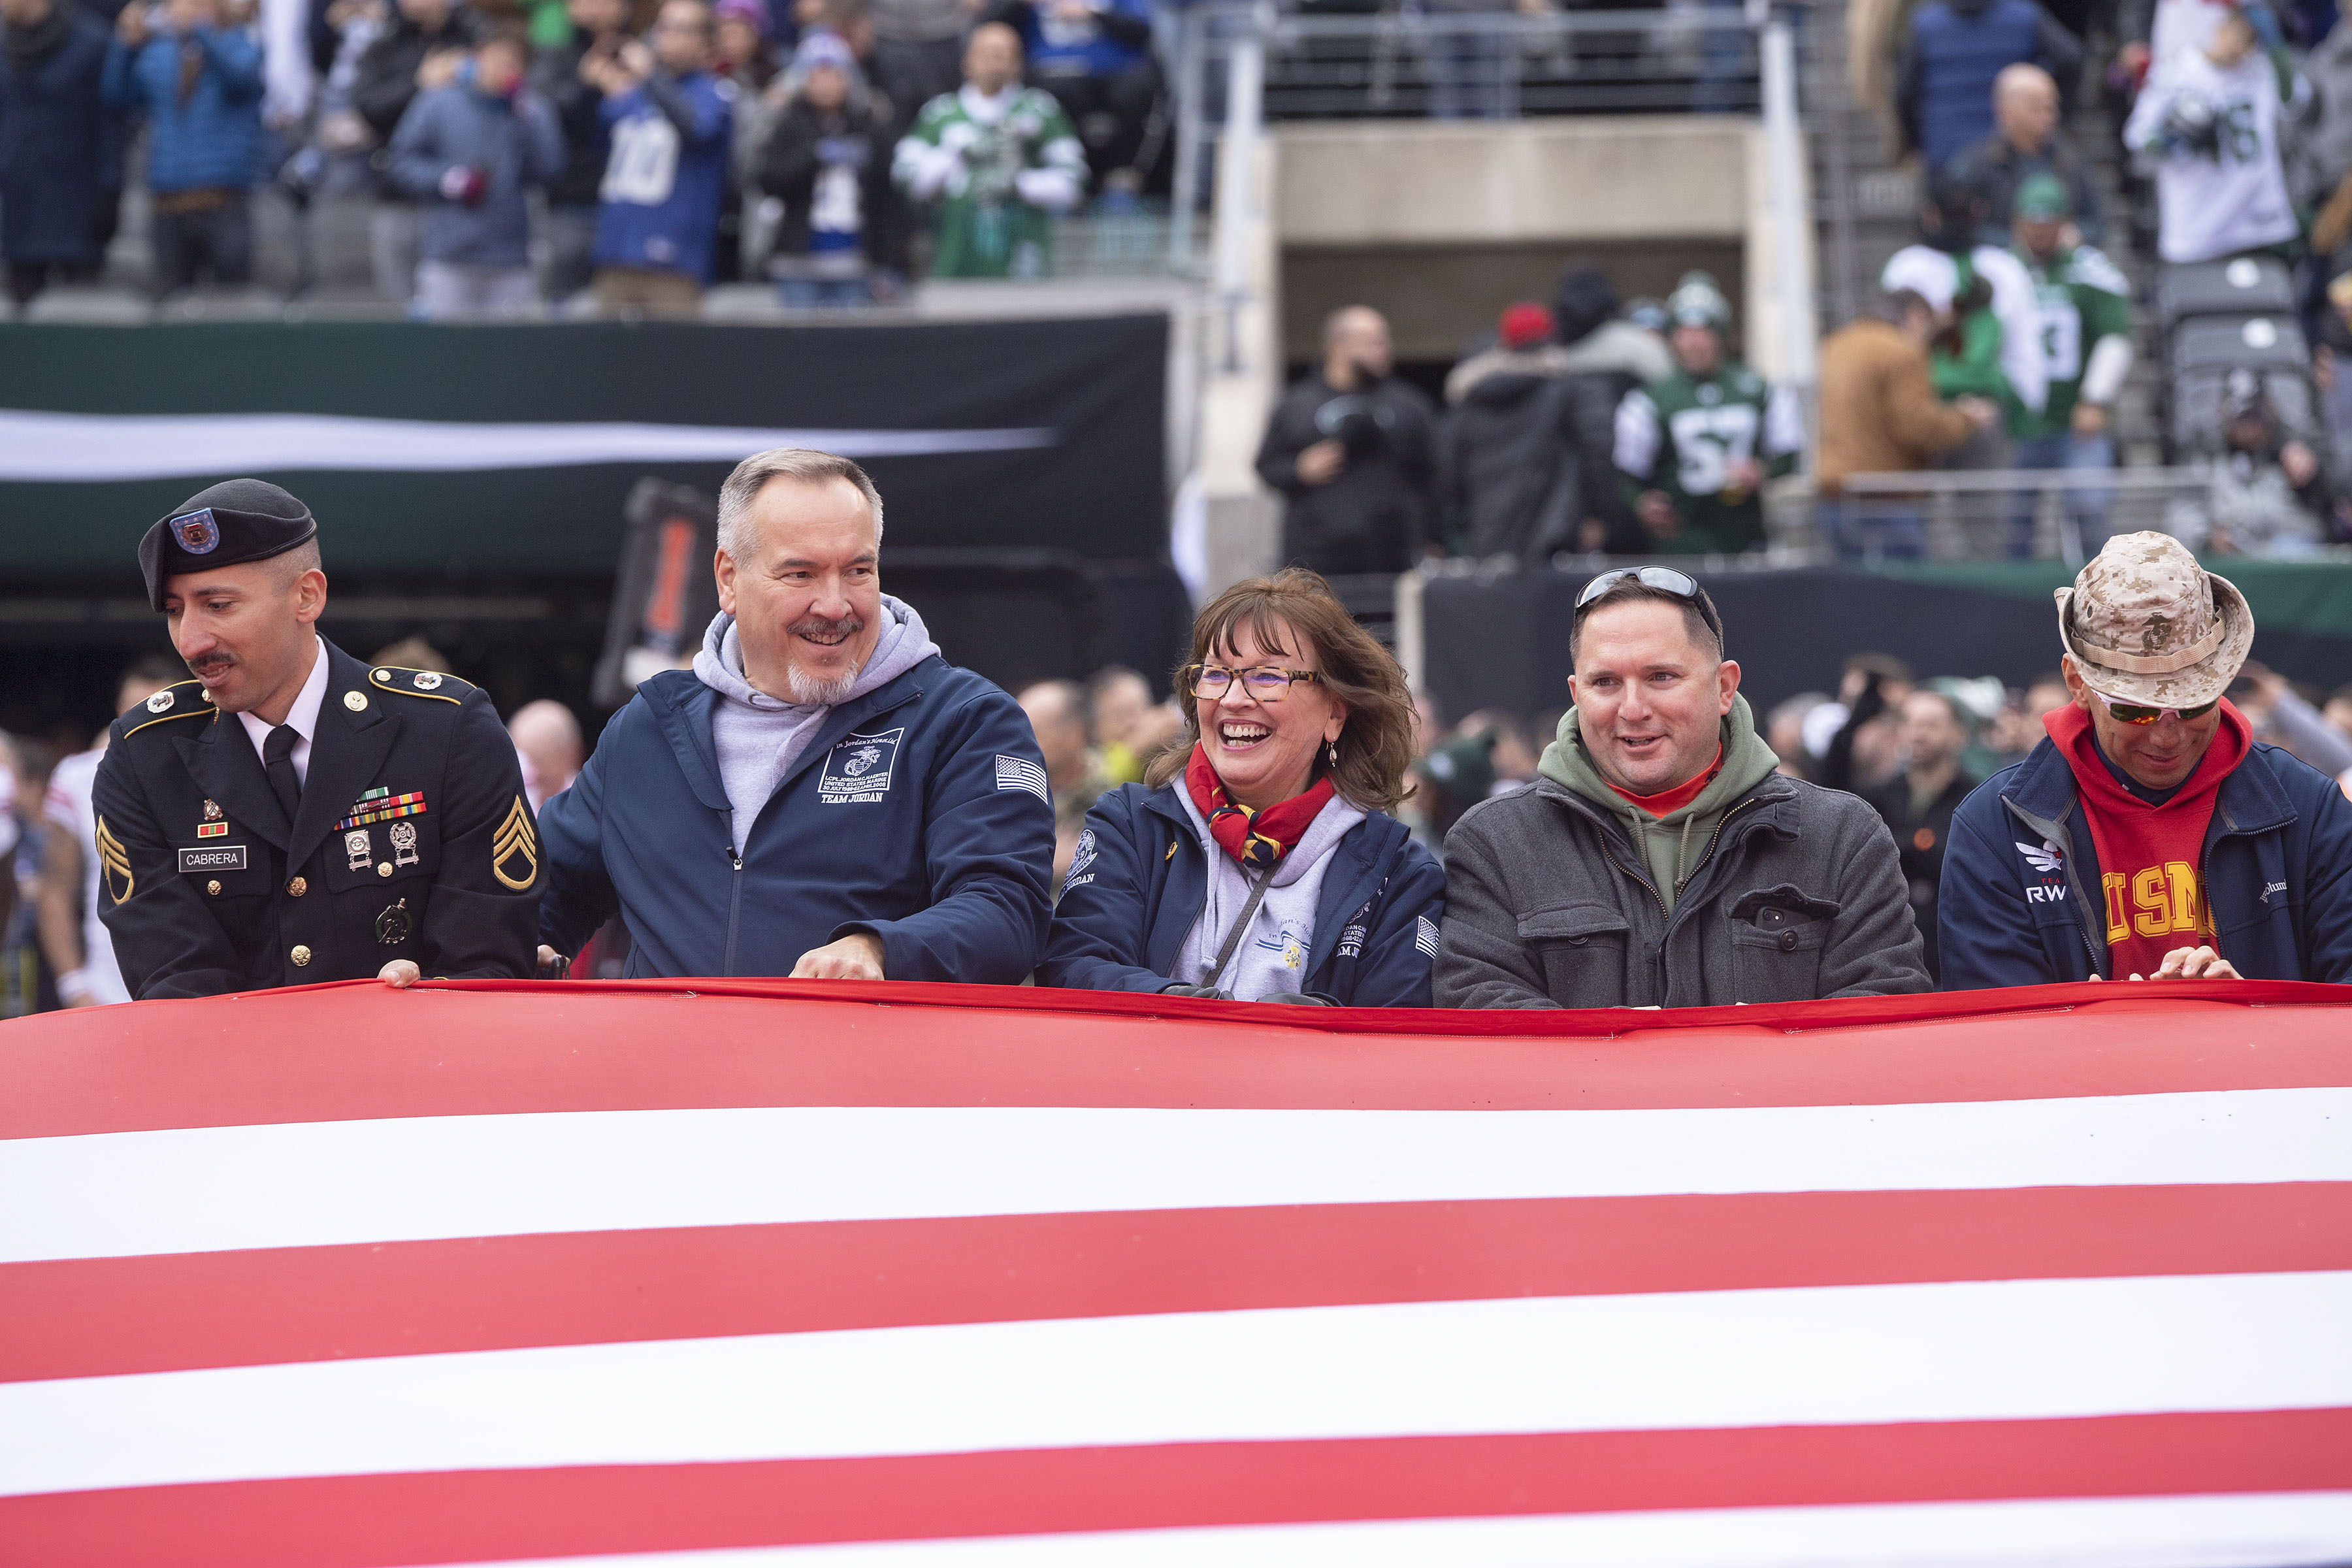 Sag Harbor Gold Star Mother JoAnn Lyles,  center, accompanied by her brother Ken, left, and several hundred Gold- and Blue-Star Families, reacts as she helps to hold open a giant American flag that was presented as part of a pre-game 